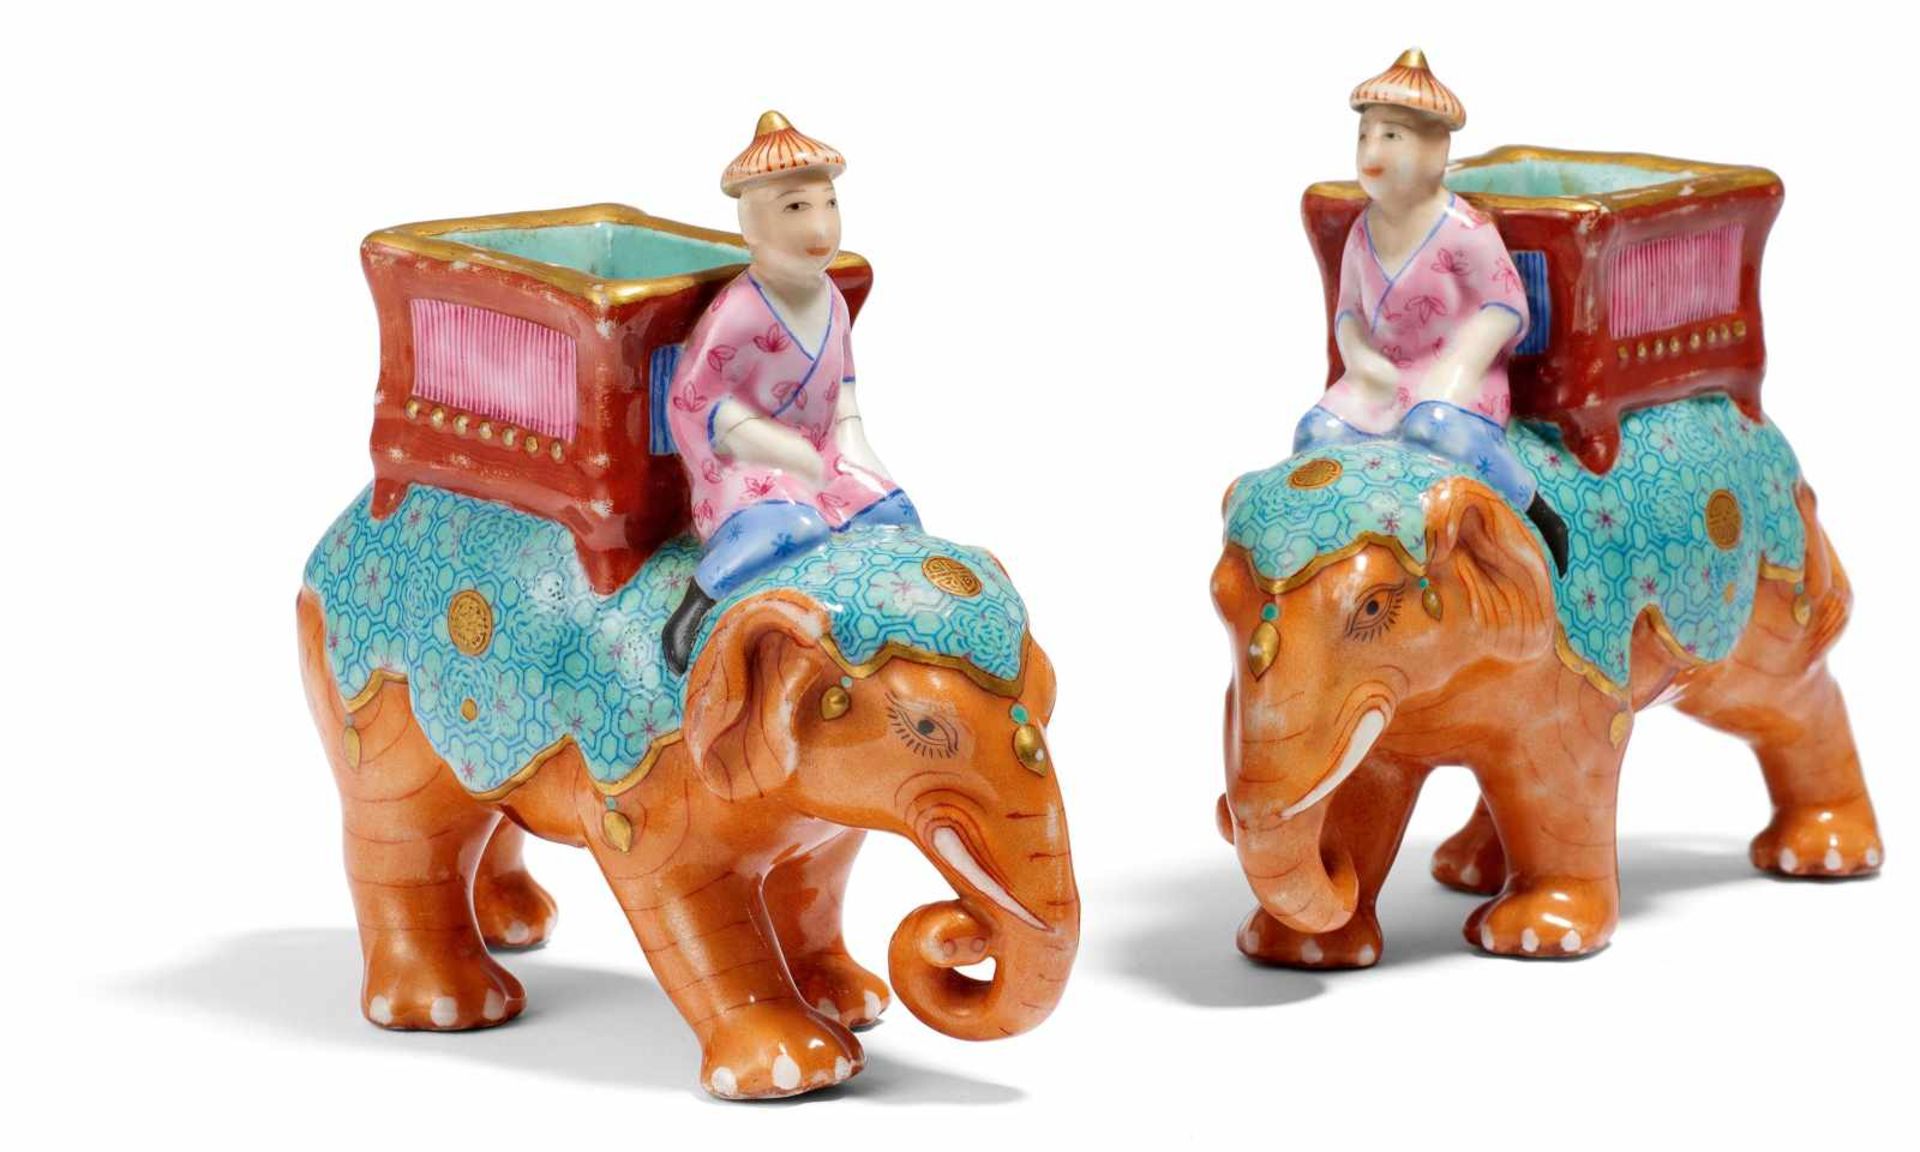 PAIR OF ELEPHANT WITH MAHOUT AND BASKET. China. Porcelain decorated in famille rose and gold. Strong